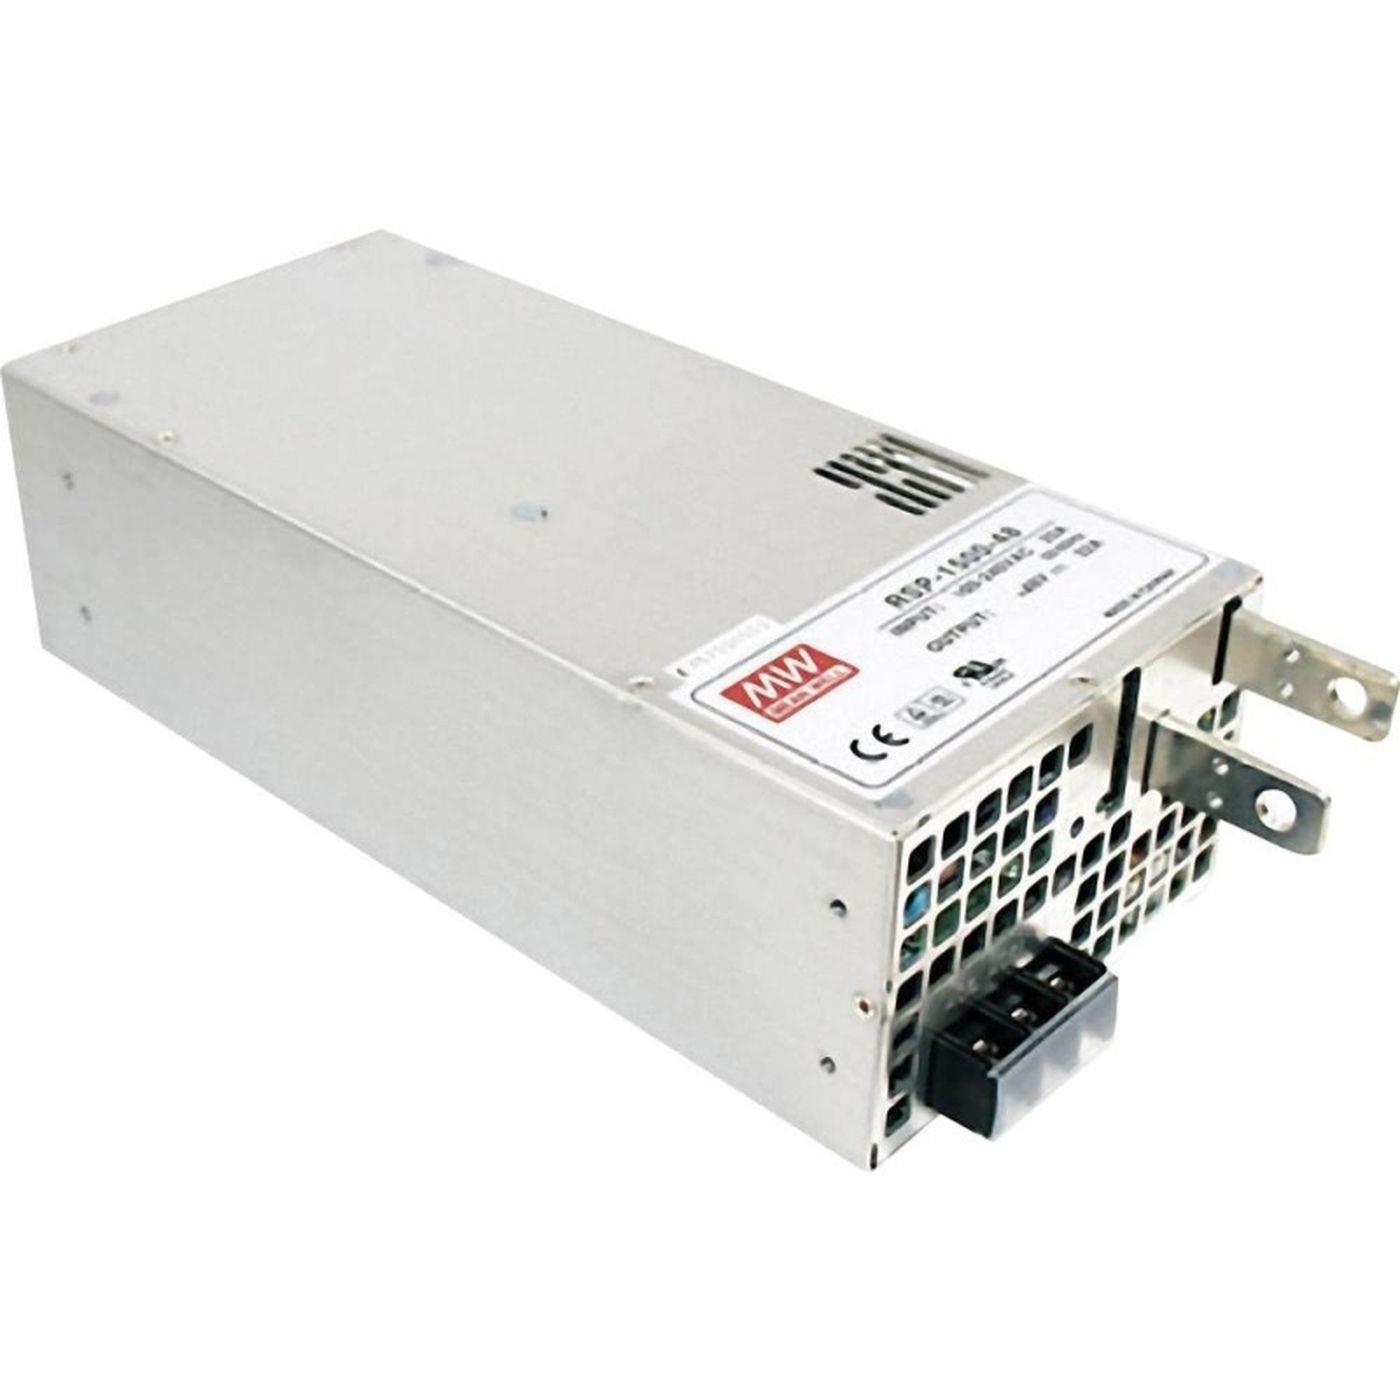 RSP-1500-12 1500W 12V 125A Industrial power supply